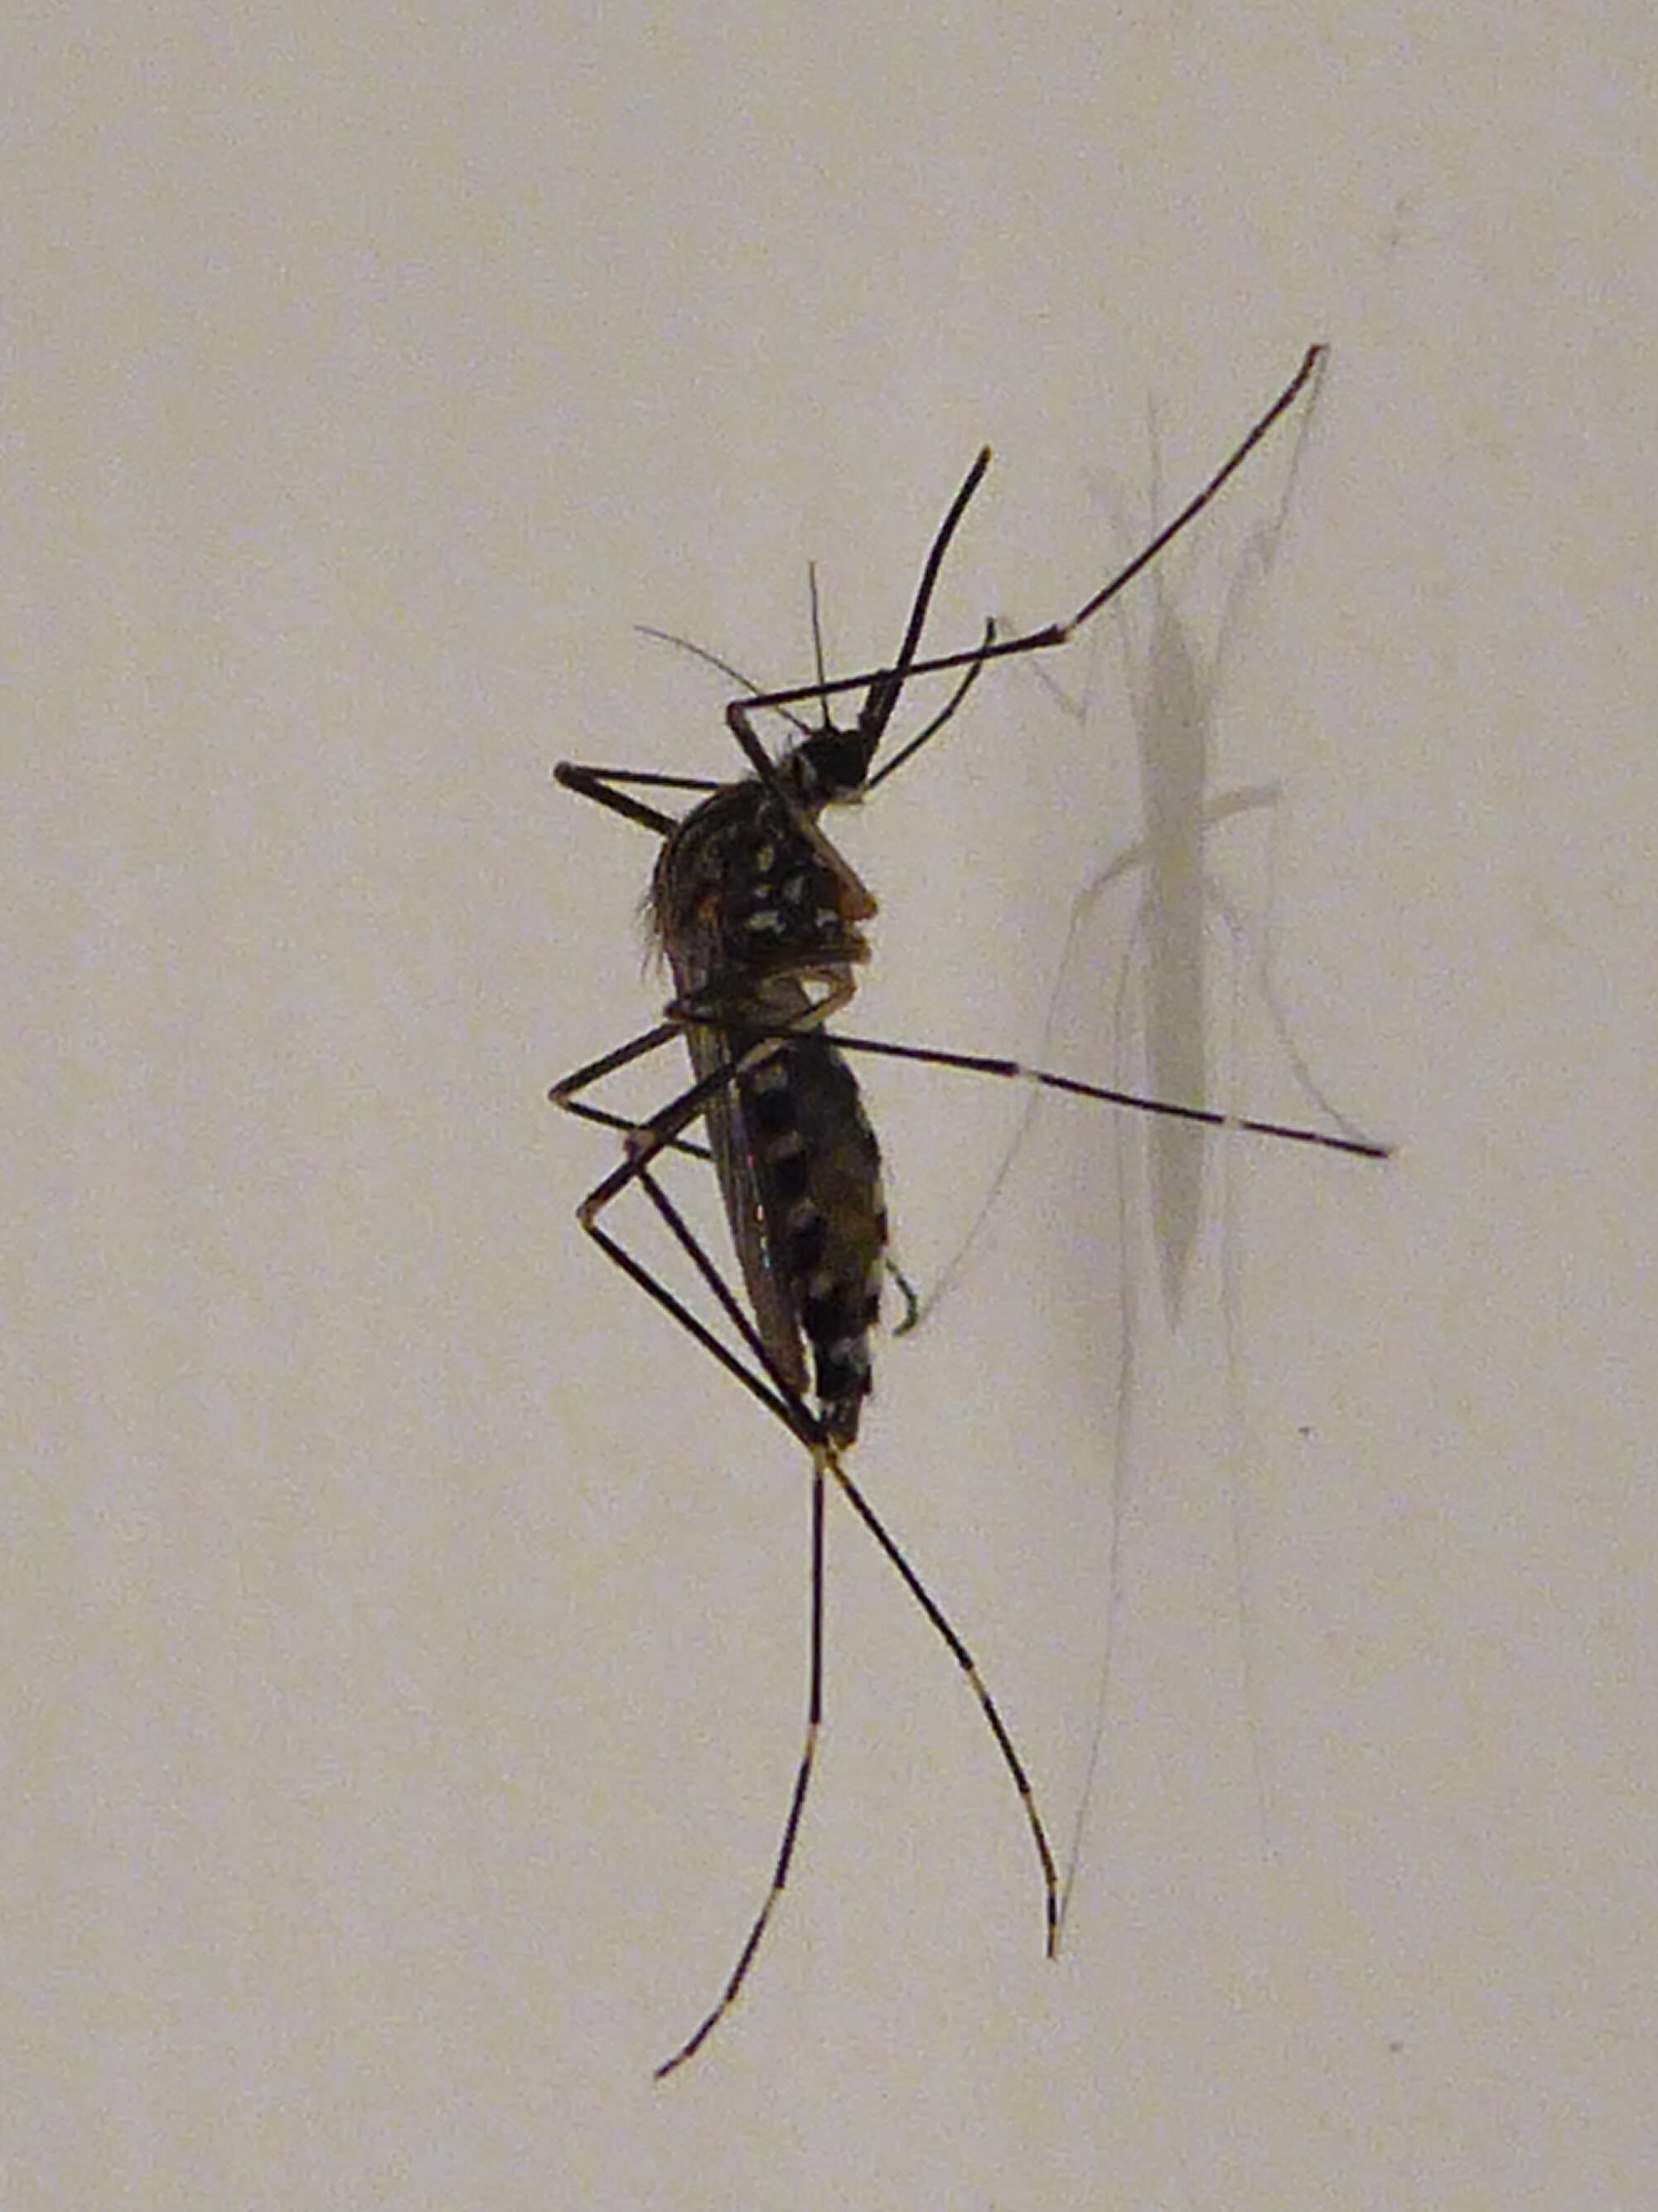 Image of Aedes koreicus (Edwards 1917)